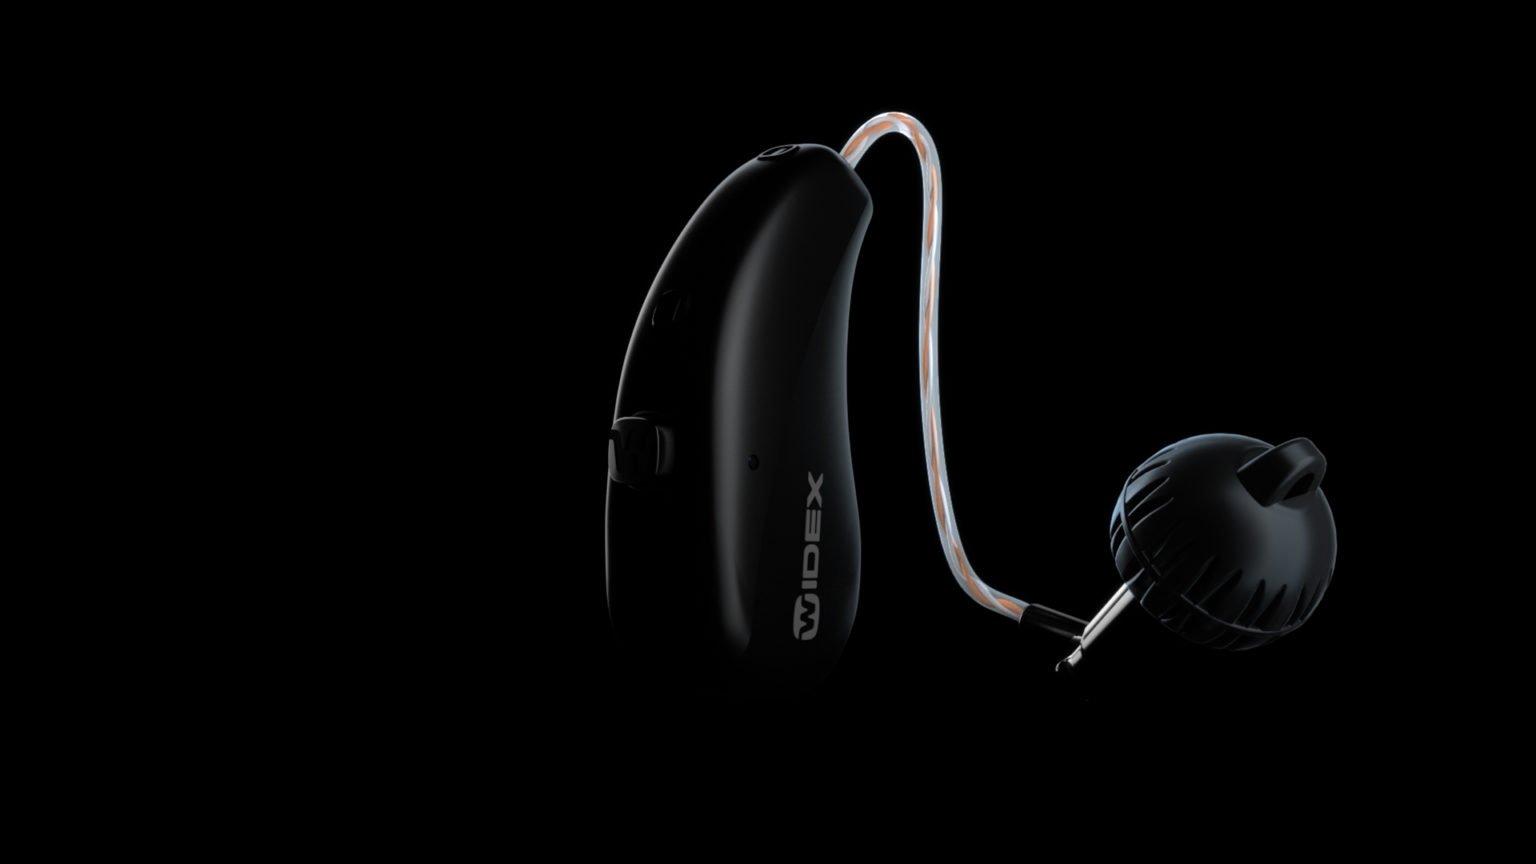 Hearing aid gets new look and sound from Widex